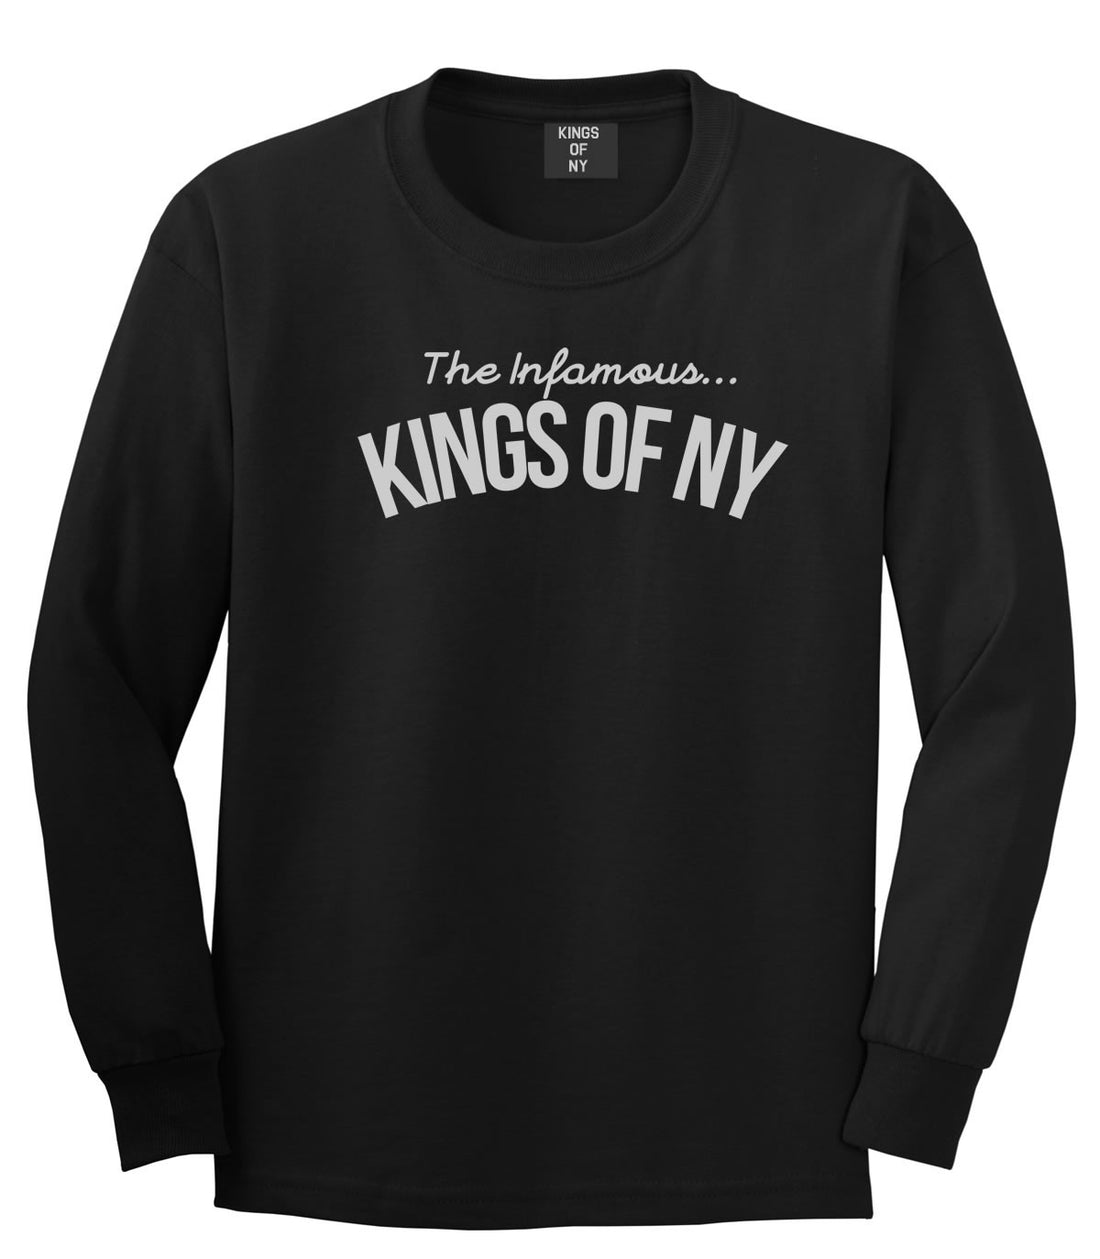 The Infamous Kings Of NY Long Sleeve T-Shirt in Black By Kings Of NY